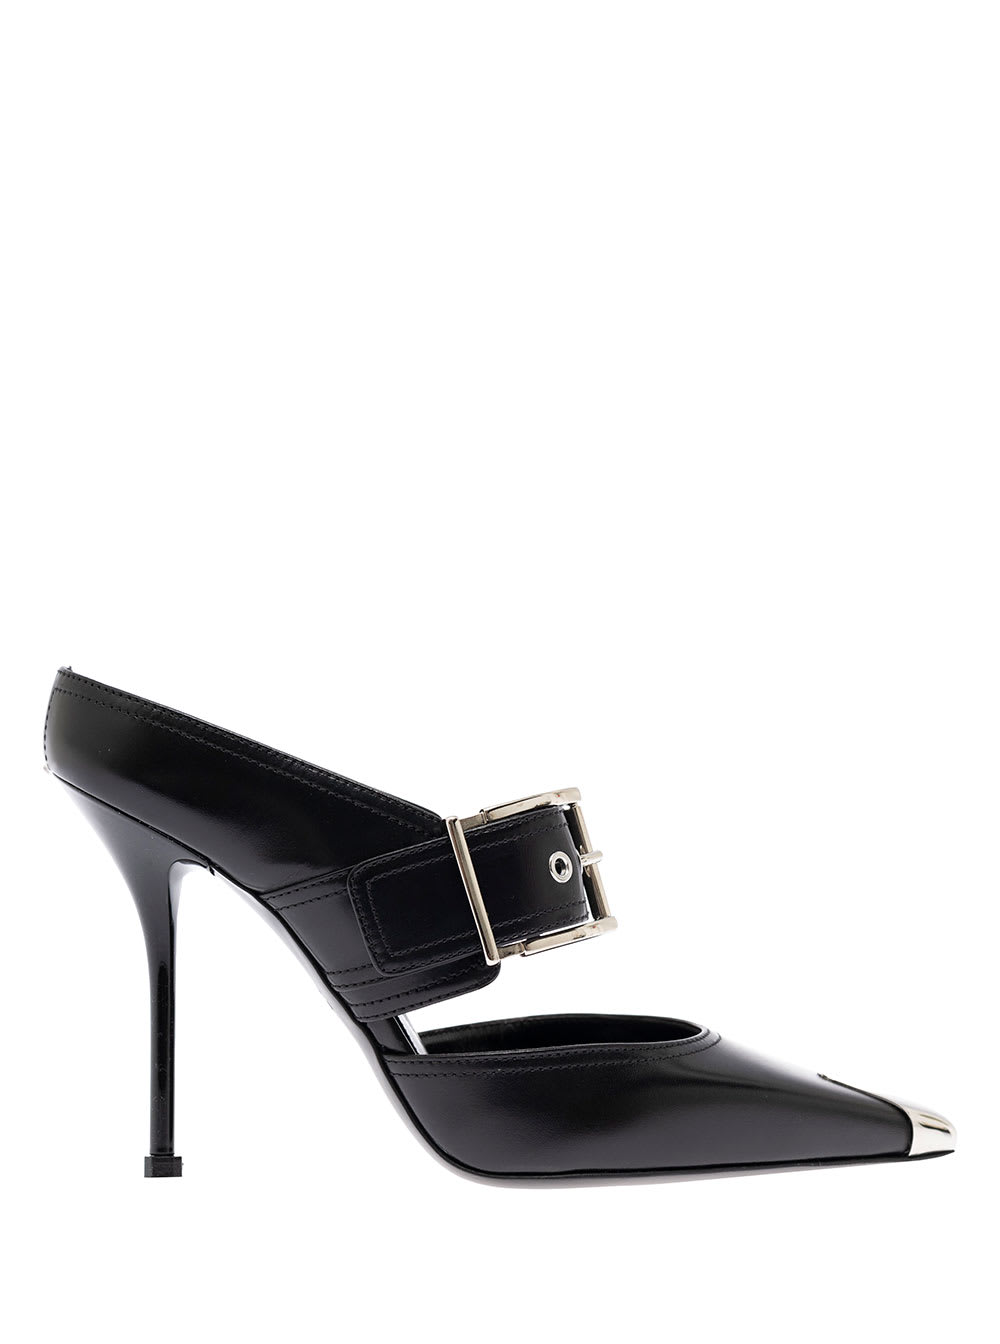 Alexander Mcqueen Womans Black Patent Leather Mules With Metal Toe And Buckle